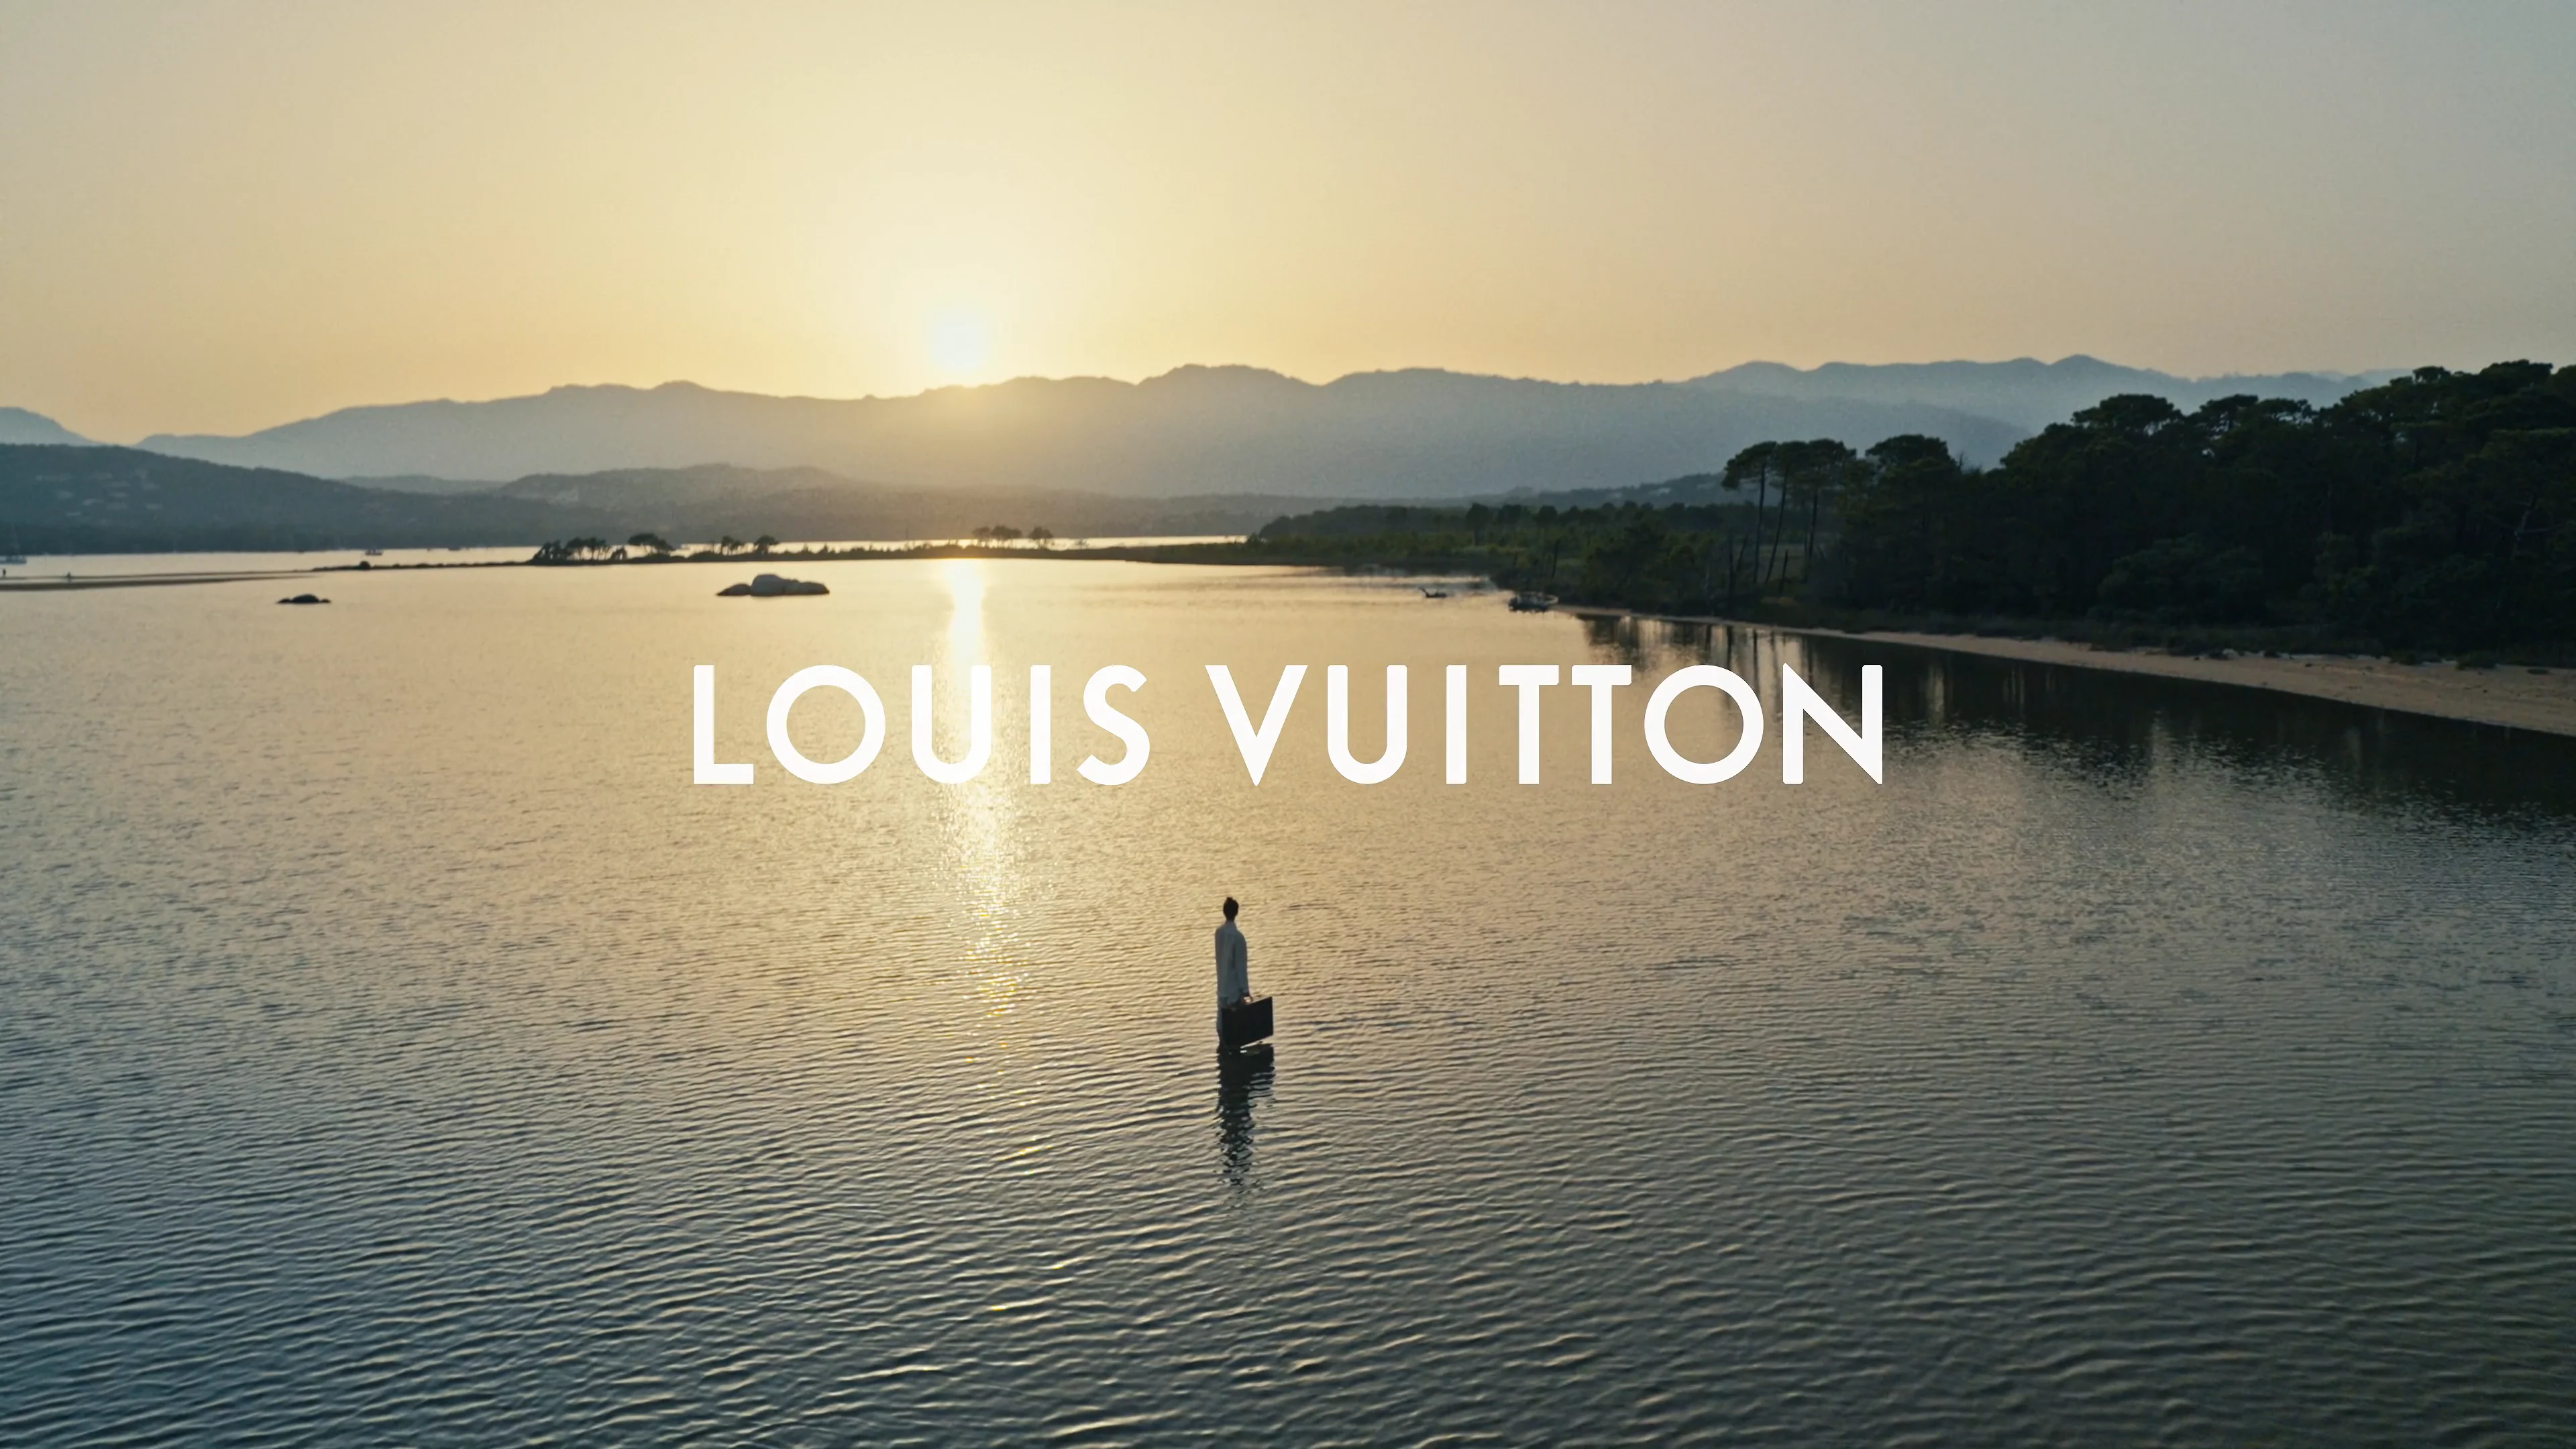 Louis Vuitton's Summer Collection, Video published by Igreatstore